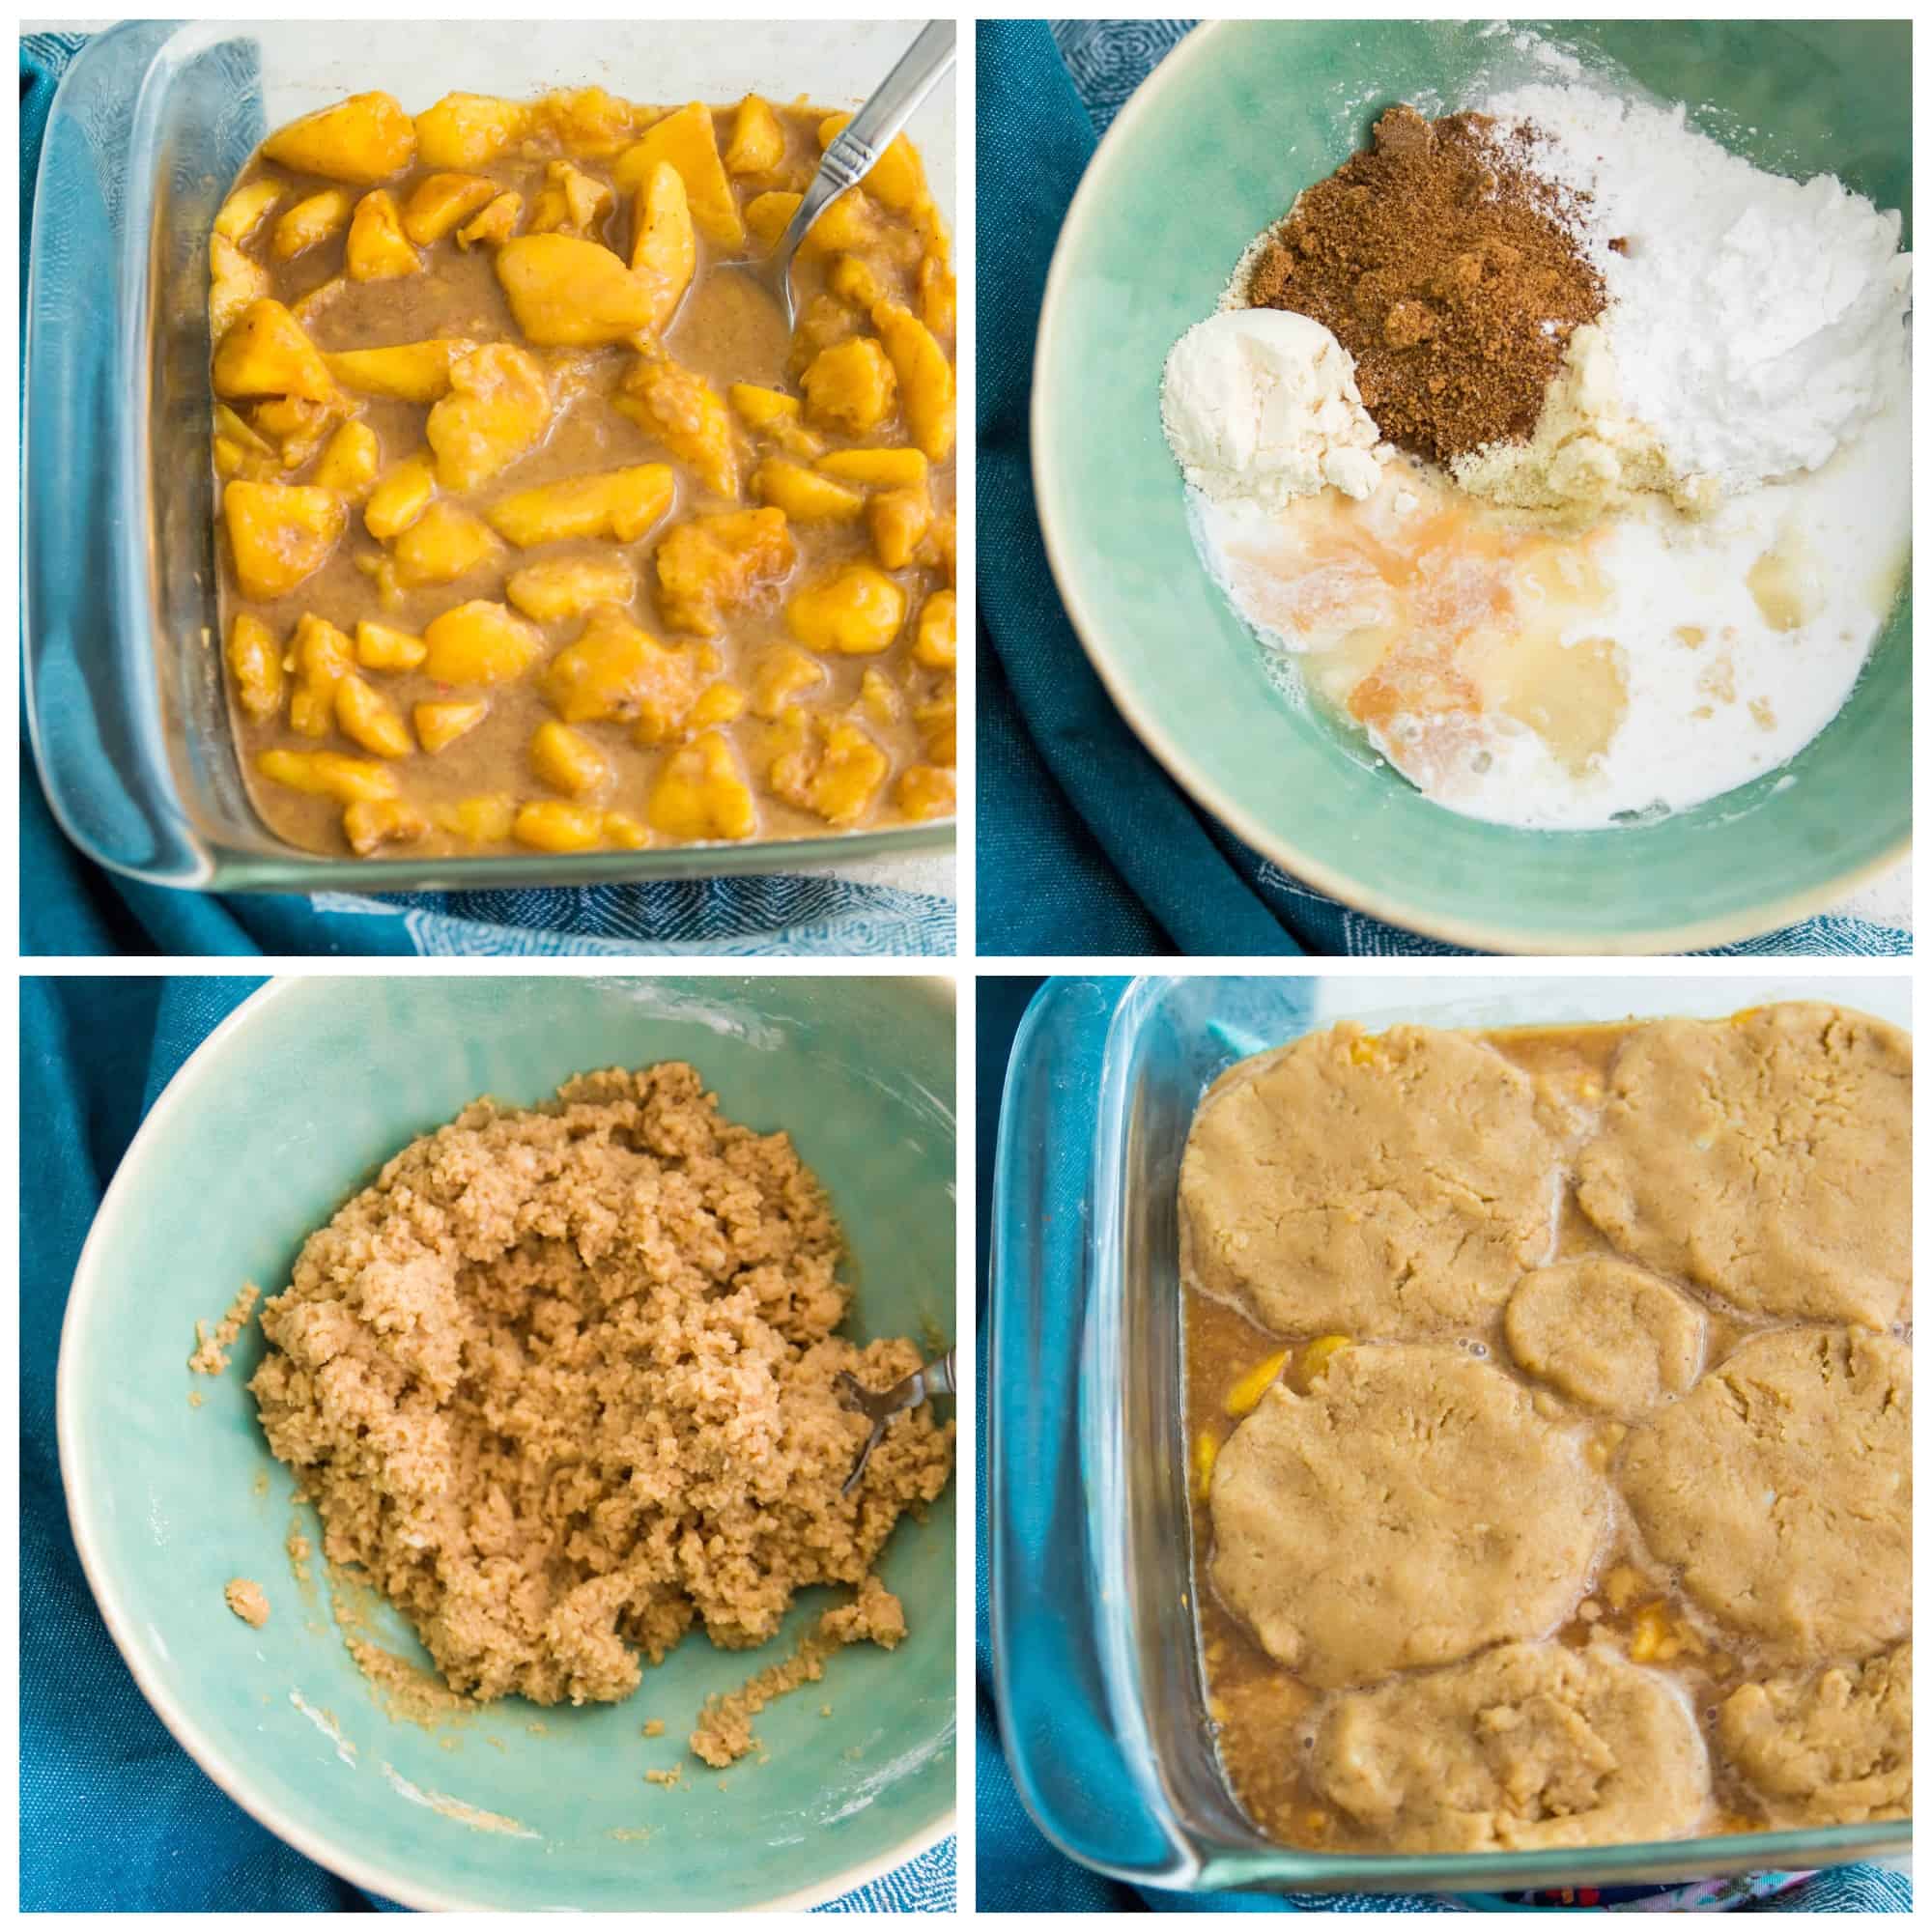 Step by step directions for making paleo peach cobbler. 